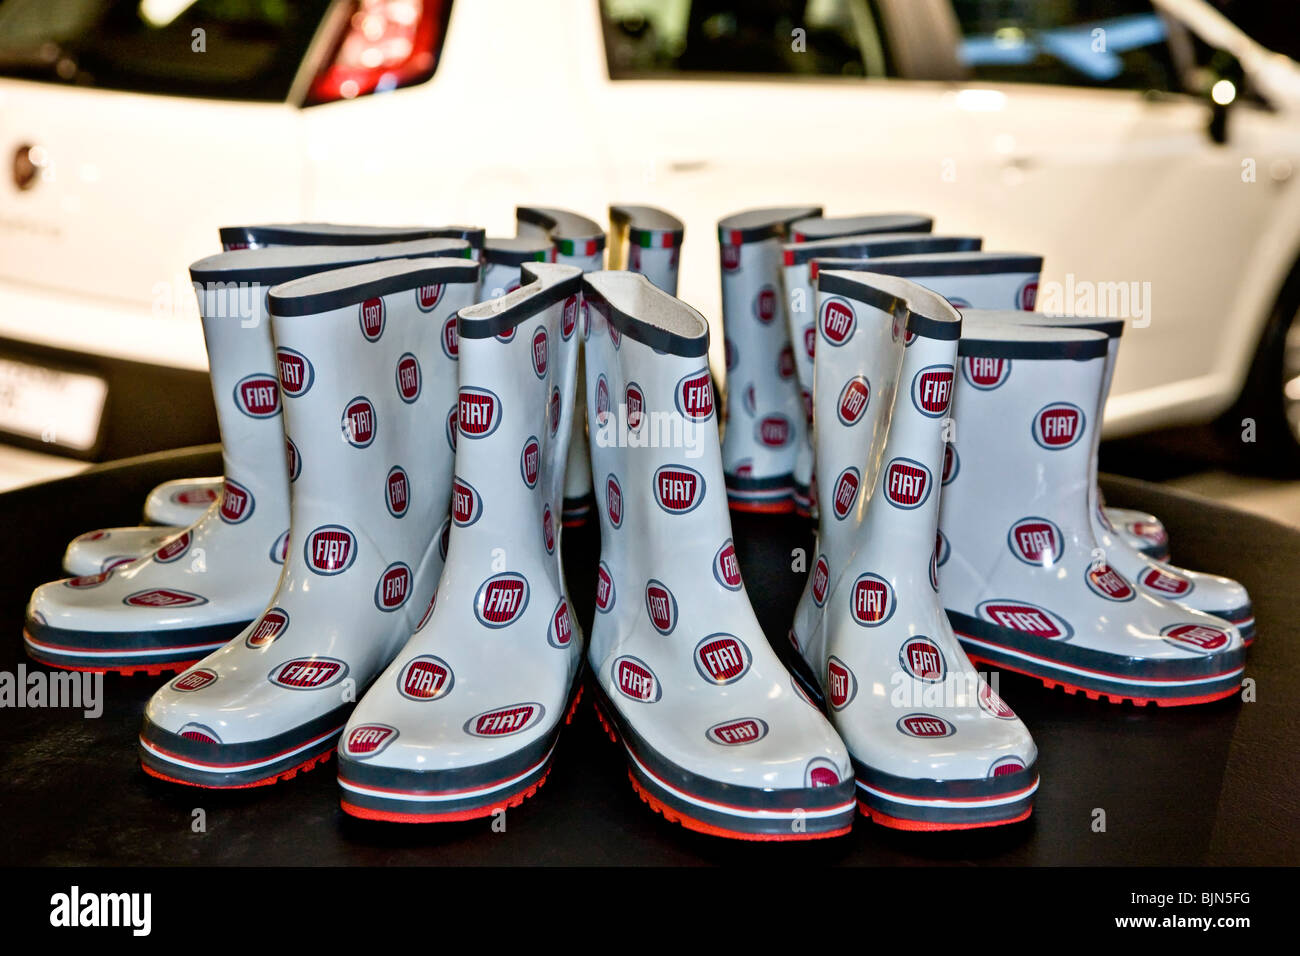 Eight pair of rubber boots with Fiat logos on a table Stock Photo